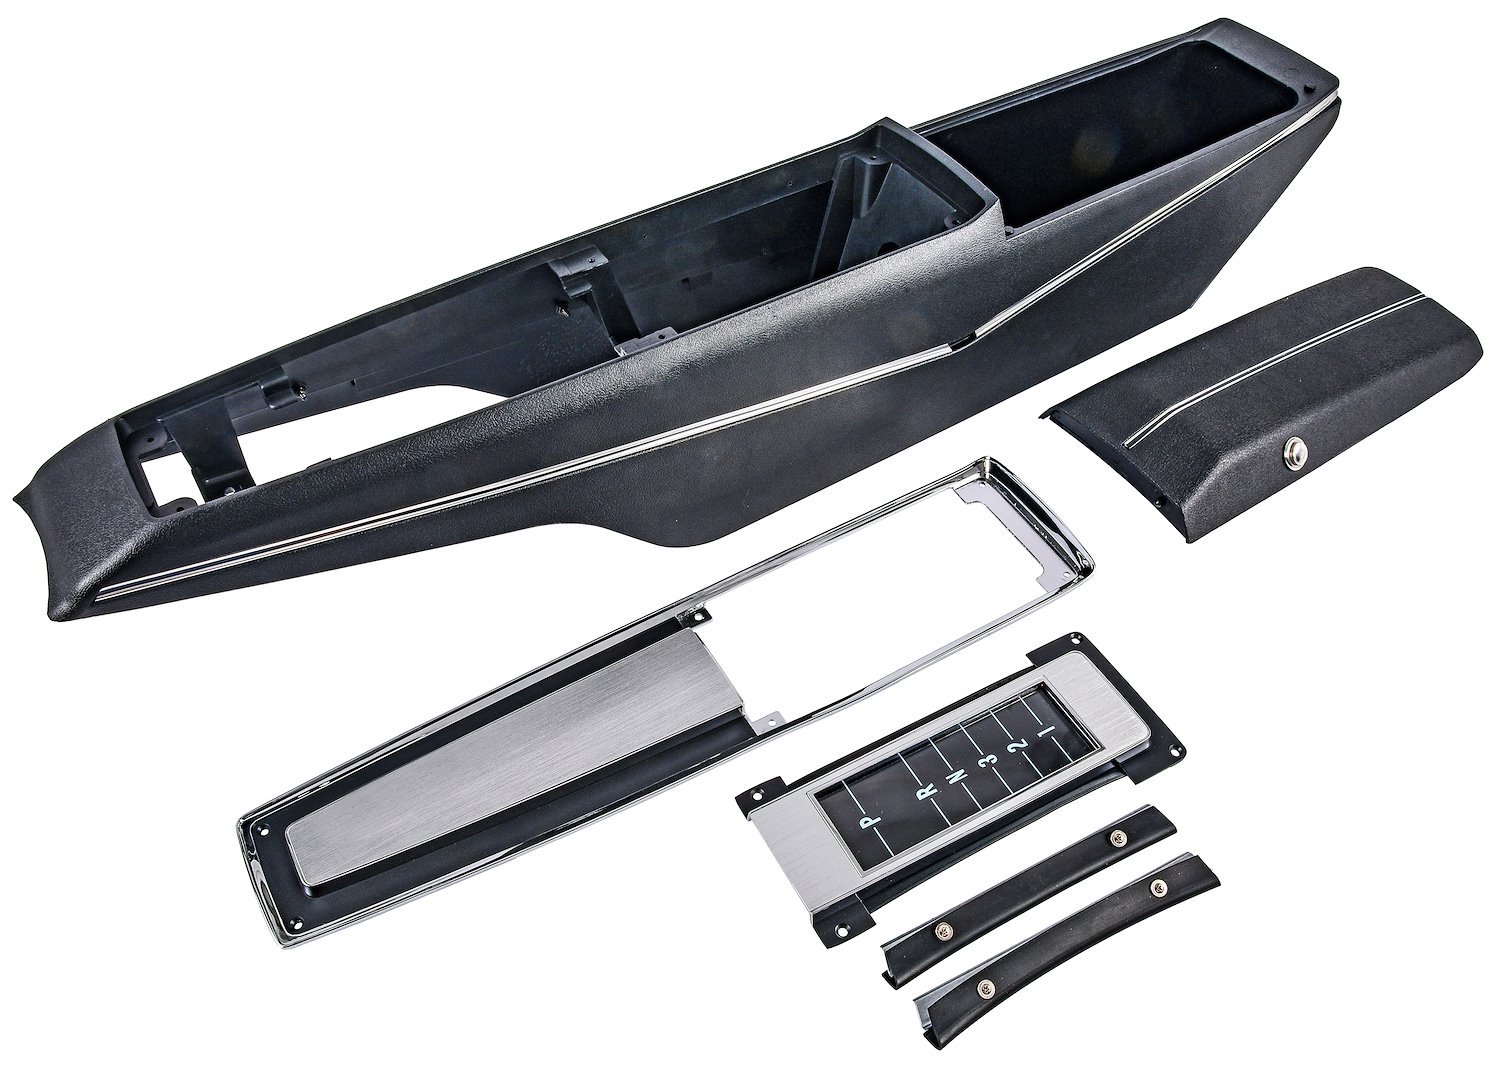 Automatic Transmission Console Kit for 1971-1972 Chevrolet Chevelle, El Camino [GM Turbo-Hydramatic Transmission]